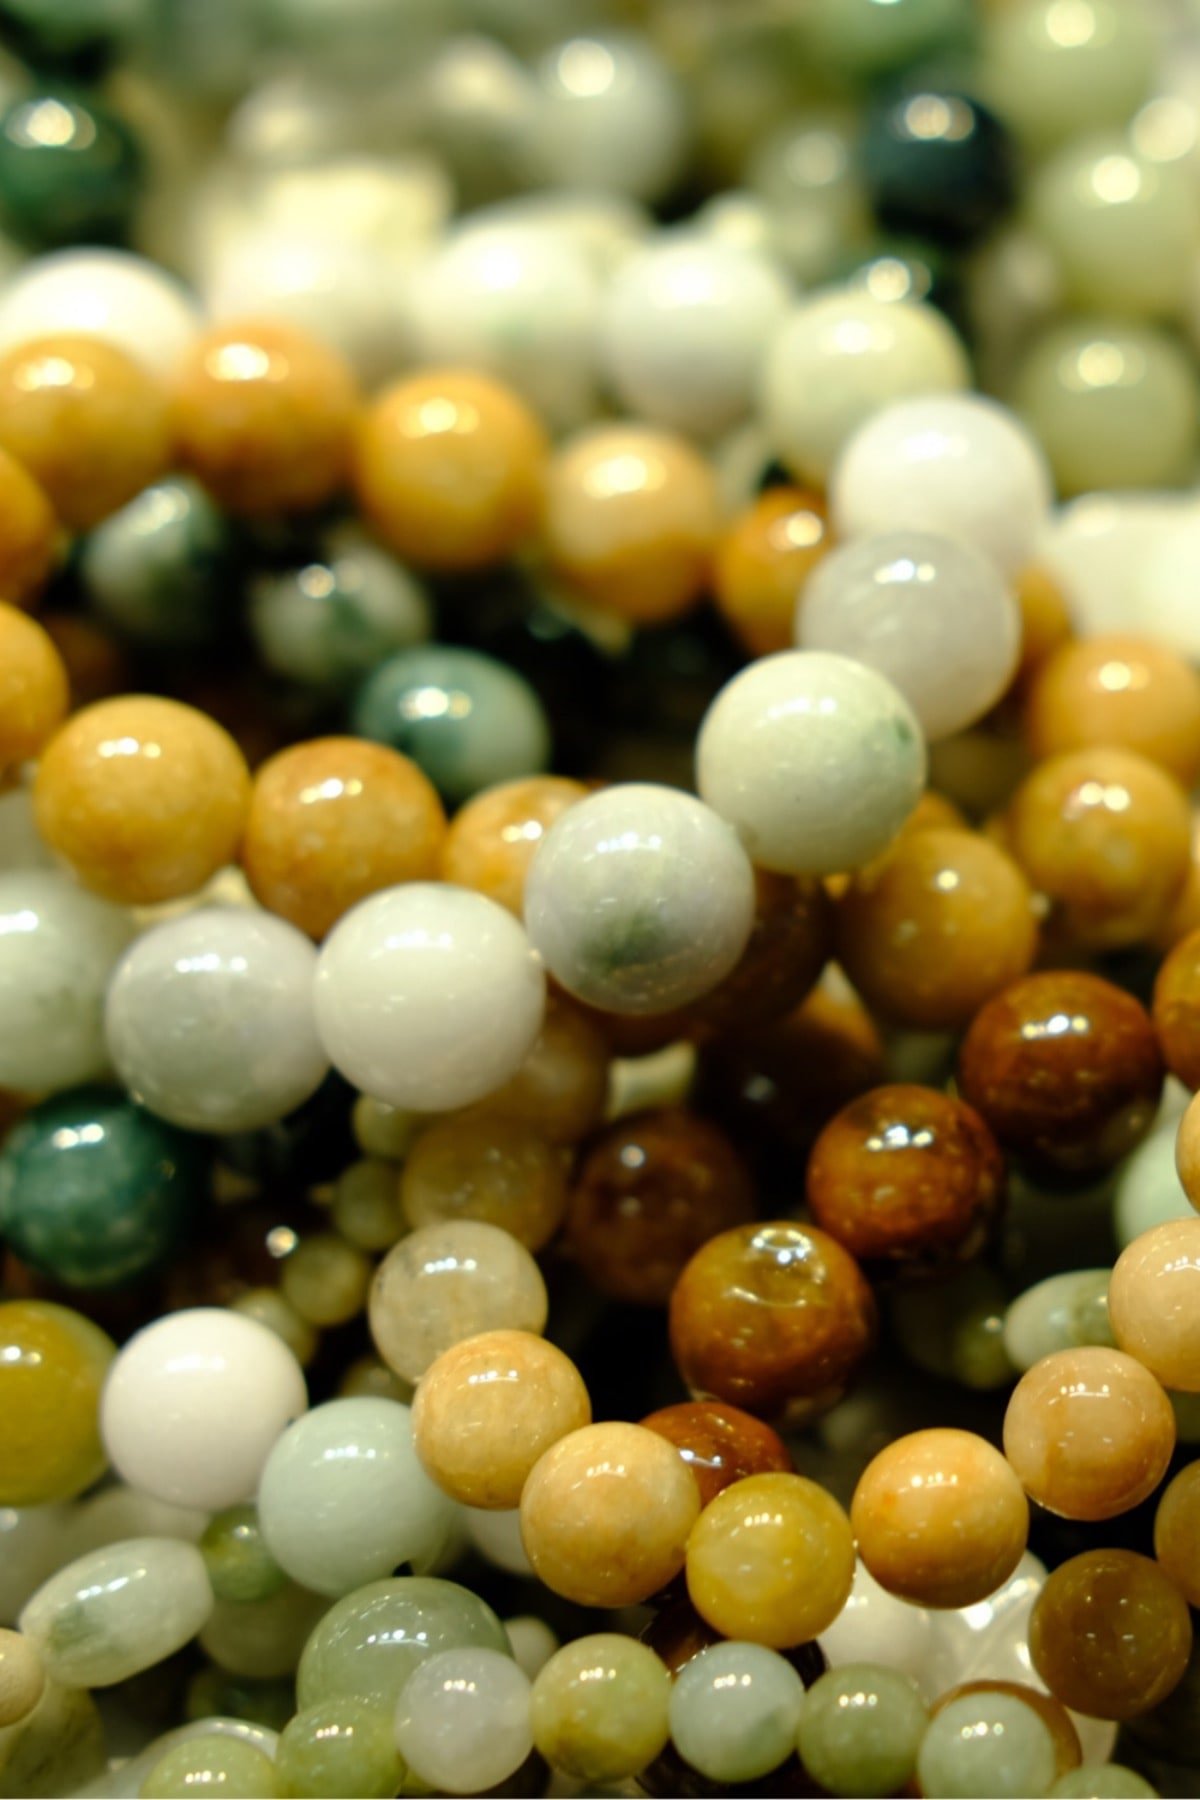 What Are The Risks of Wearing Fake Jade? – Baikalla